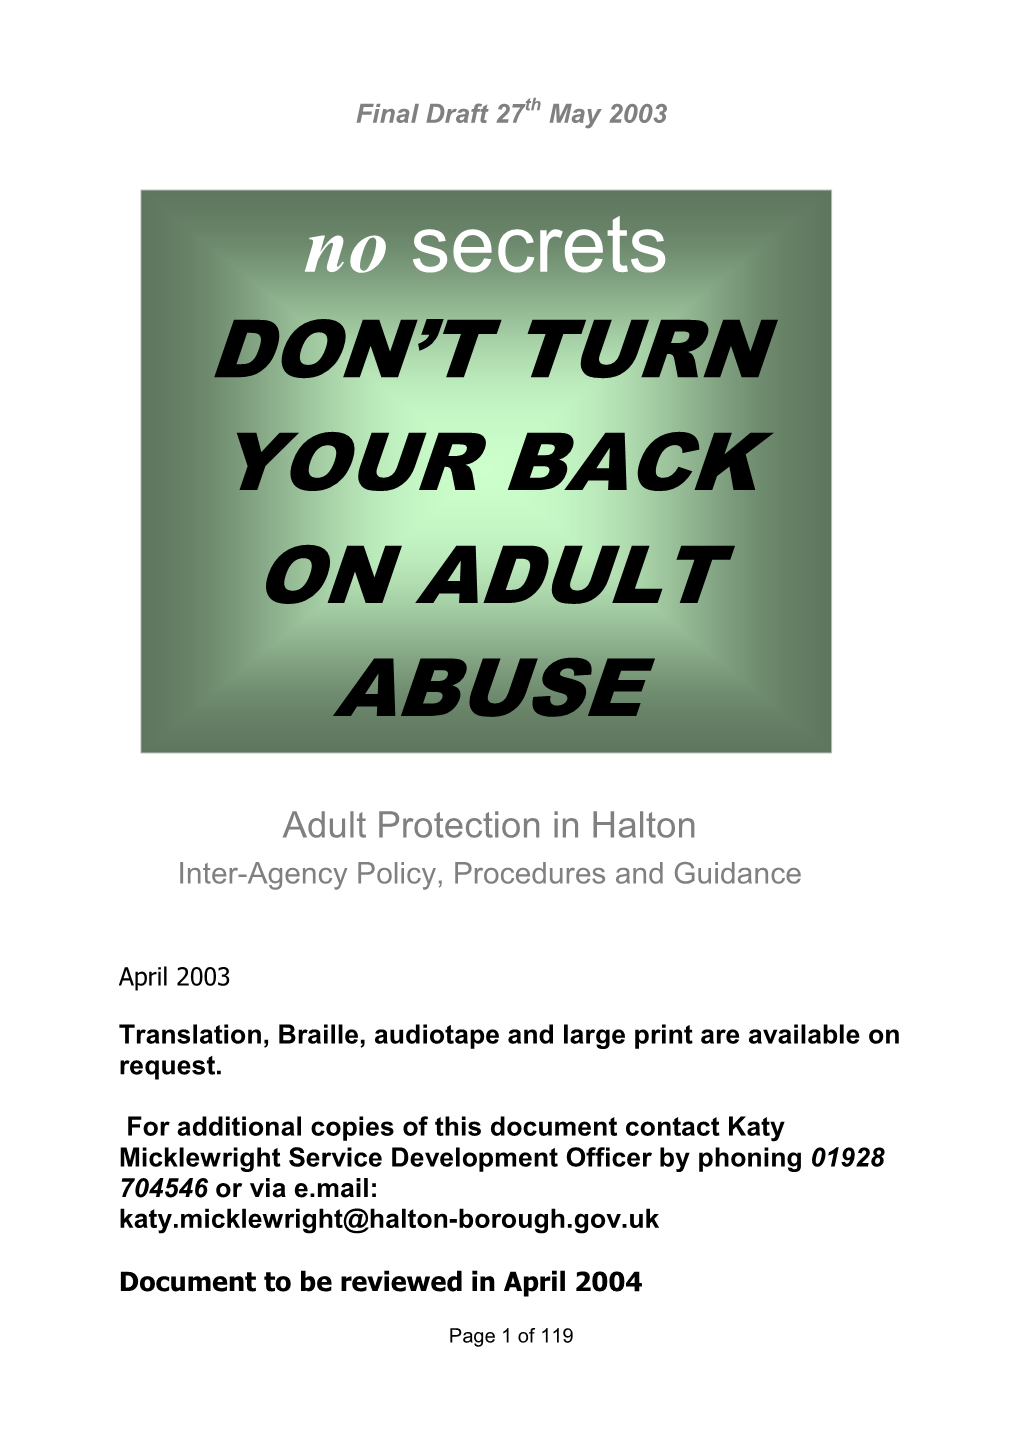 Don't Turn Your Back on Adult Abuse